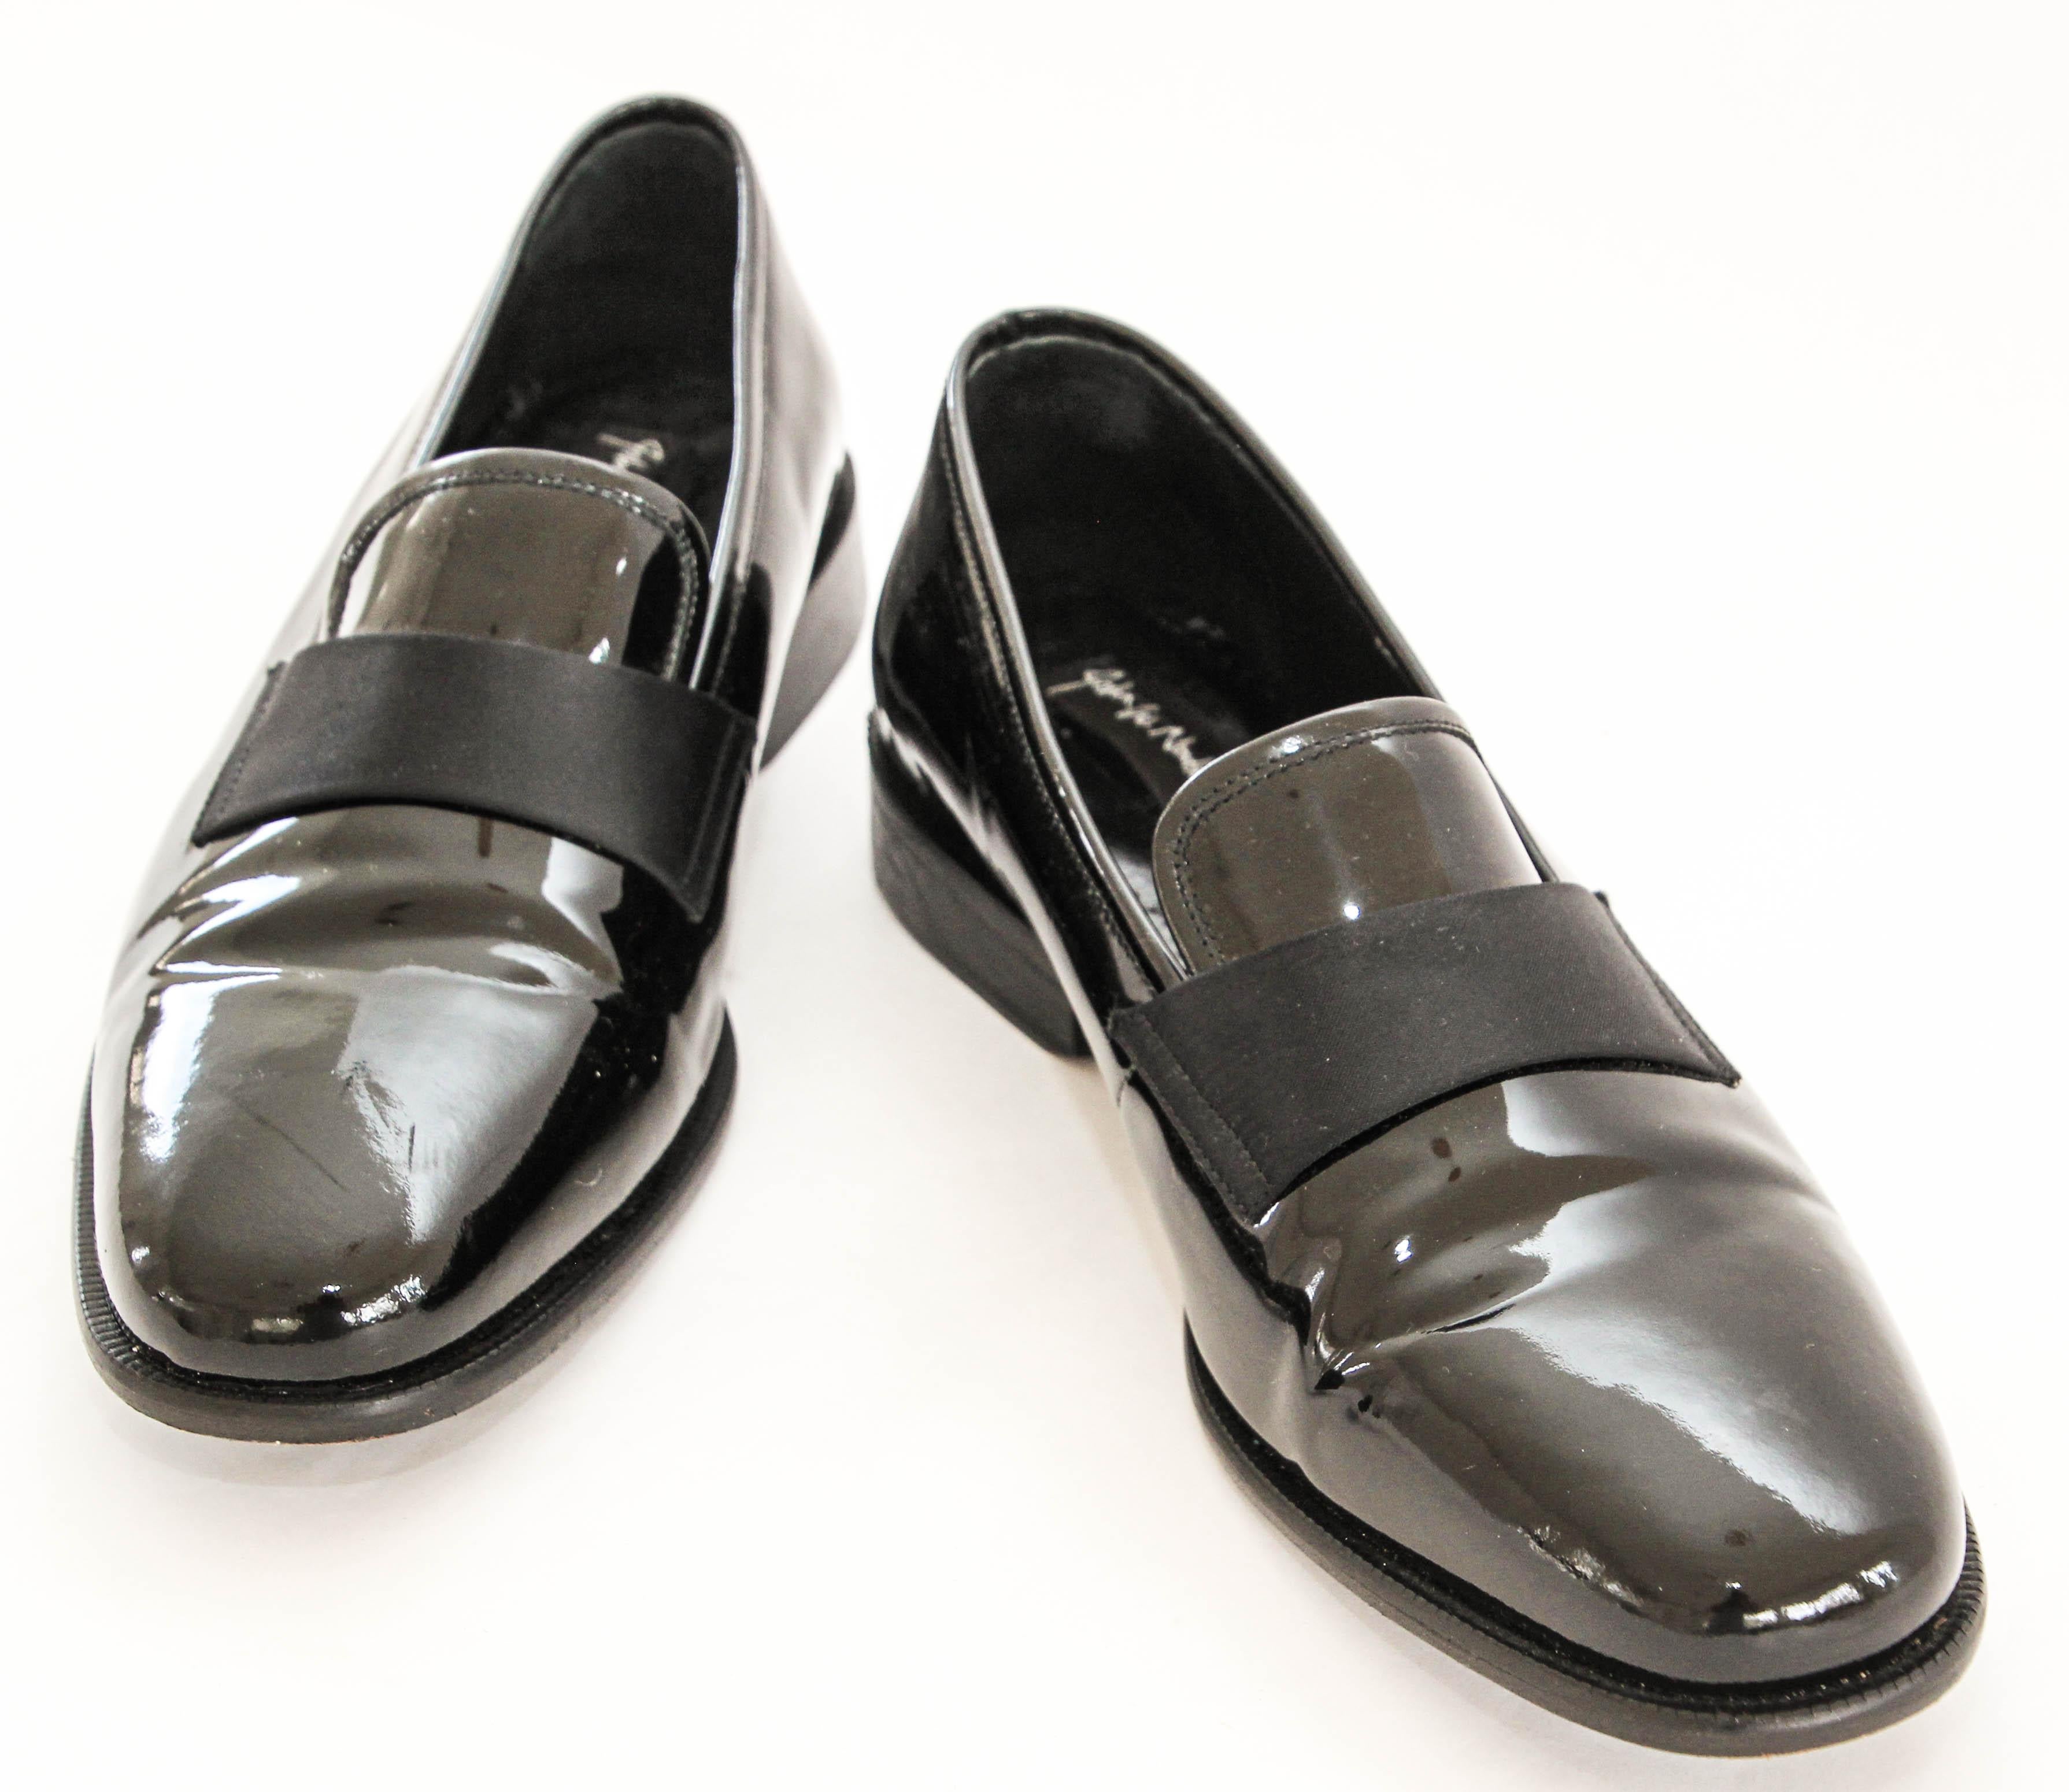 John Varvatos Maestro Men's Slip-On Dress Loafers in Black Patent Leather Sz 9 M In Good Condition For Sale In North Hollywood, CA